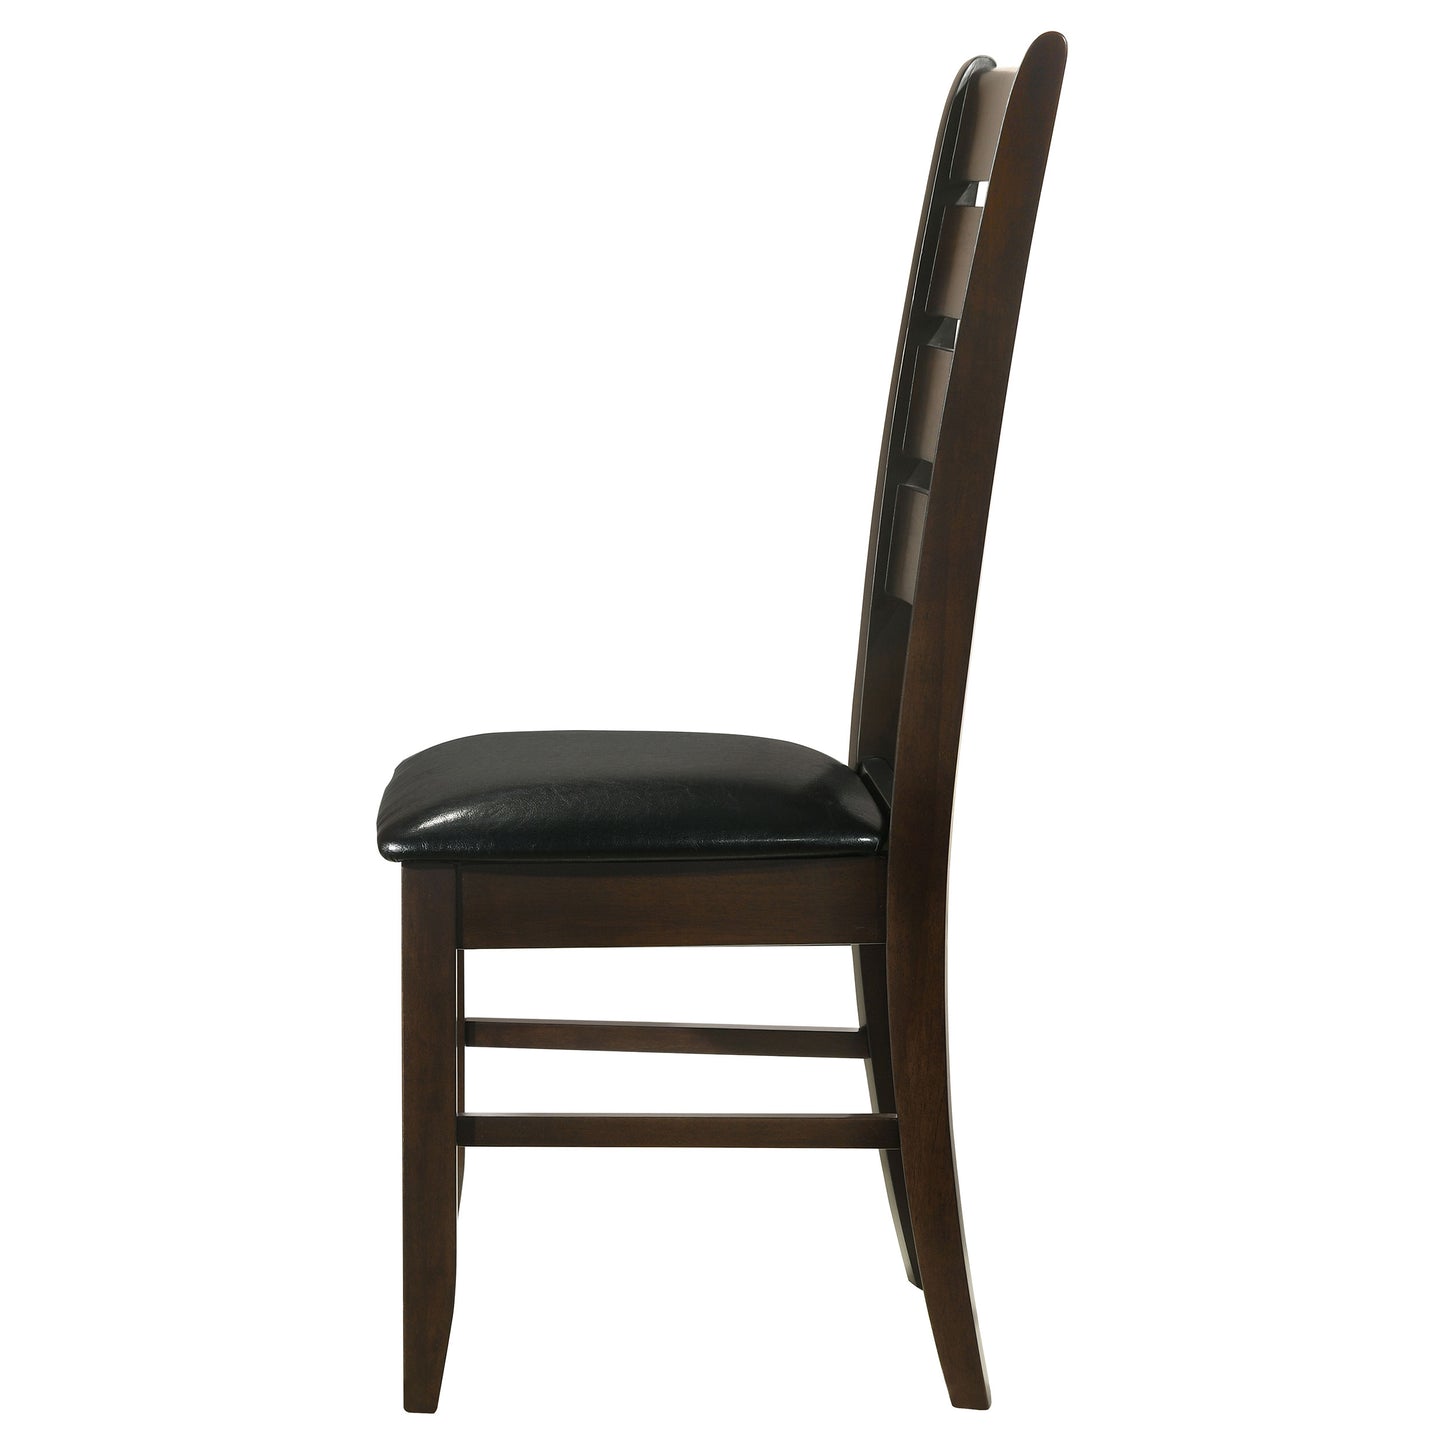 Dalila Ladder Back Side Chairs Cappuccino and Black (Set of 2)